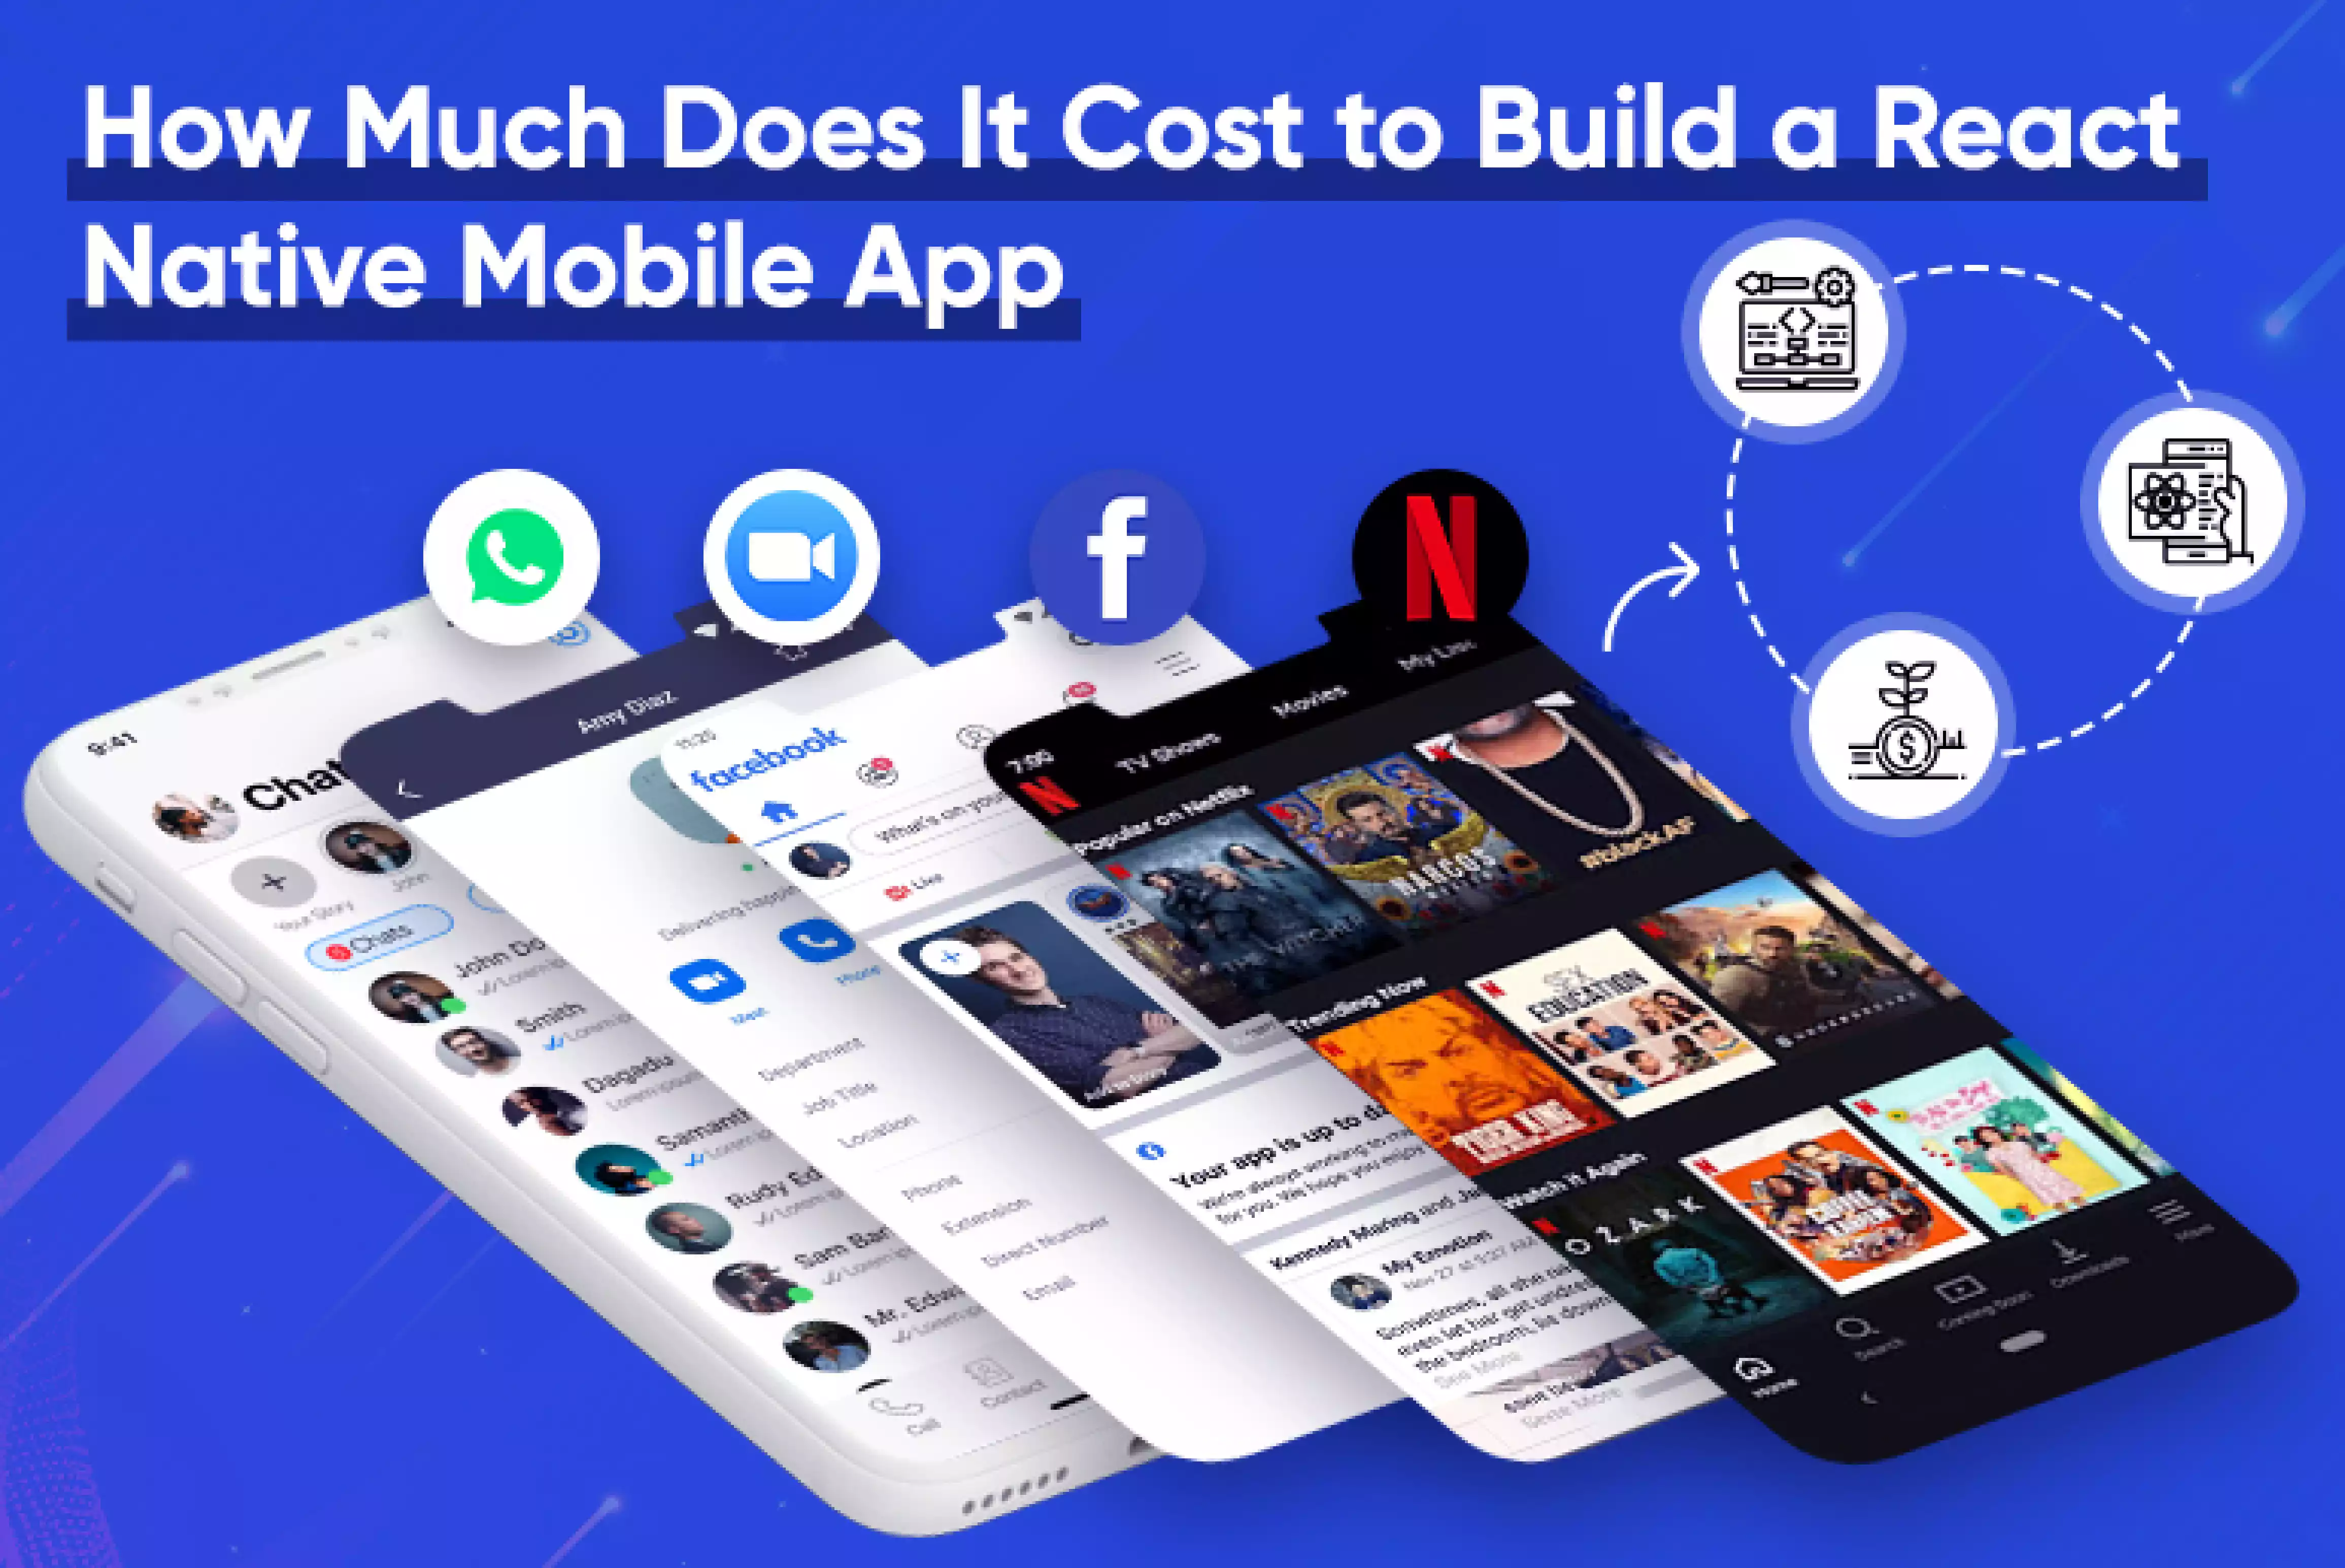 How Much Does It Cost to Build a React Native Mobile App_Thum